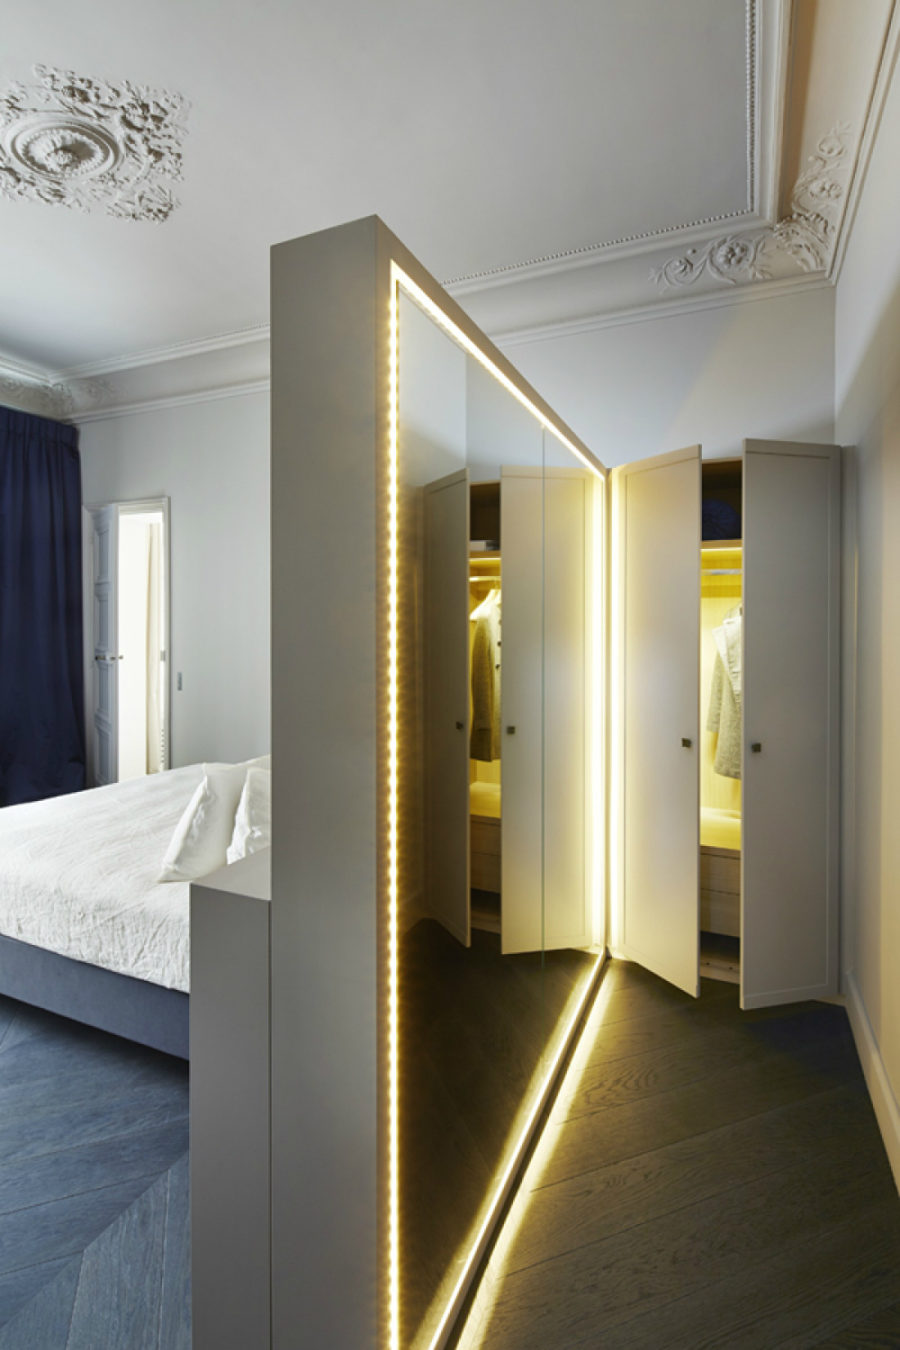 Mirrored wall 900x600 Bedroom Mirror Designs That Reflect Personality